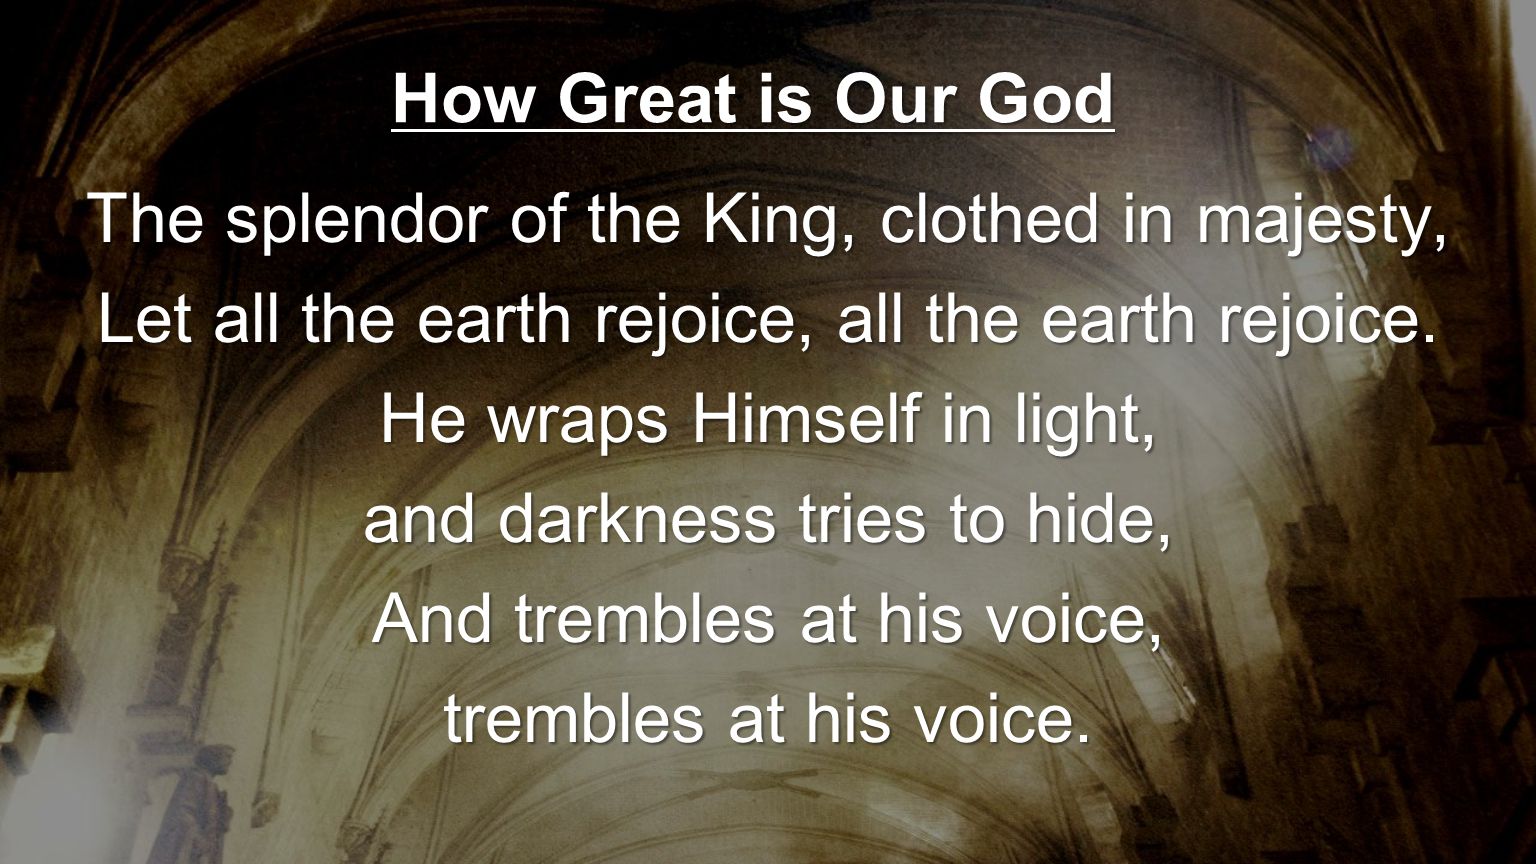 The splendor of the King, clothed in majesty,